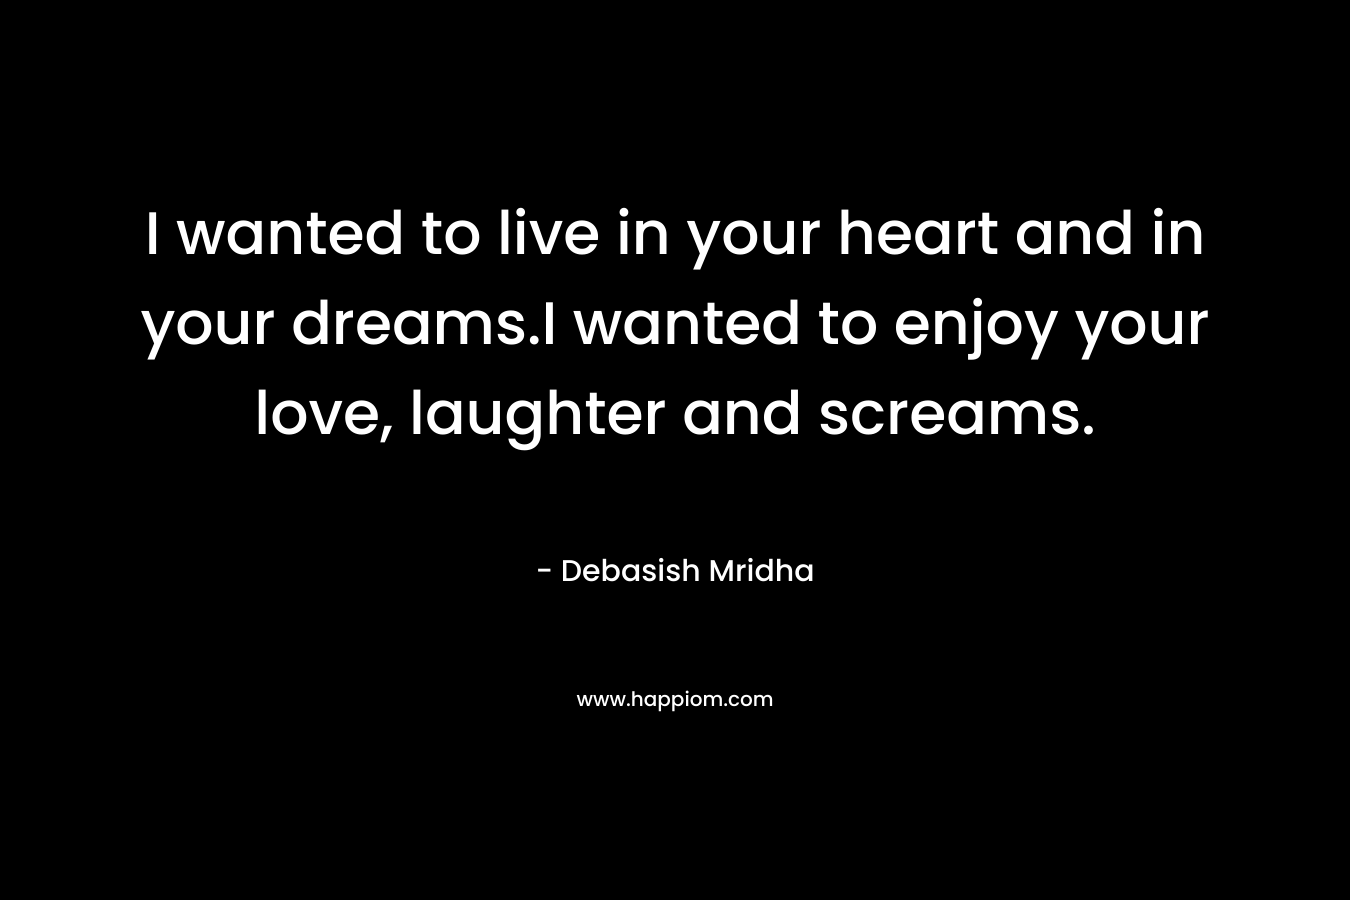 I wanted to live in your heart and in your dreams.I wanted to enjoy your love, laughter and screams. – Debasish Mridha